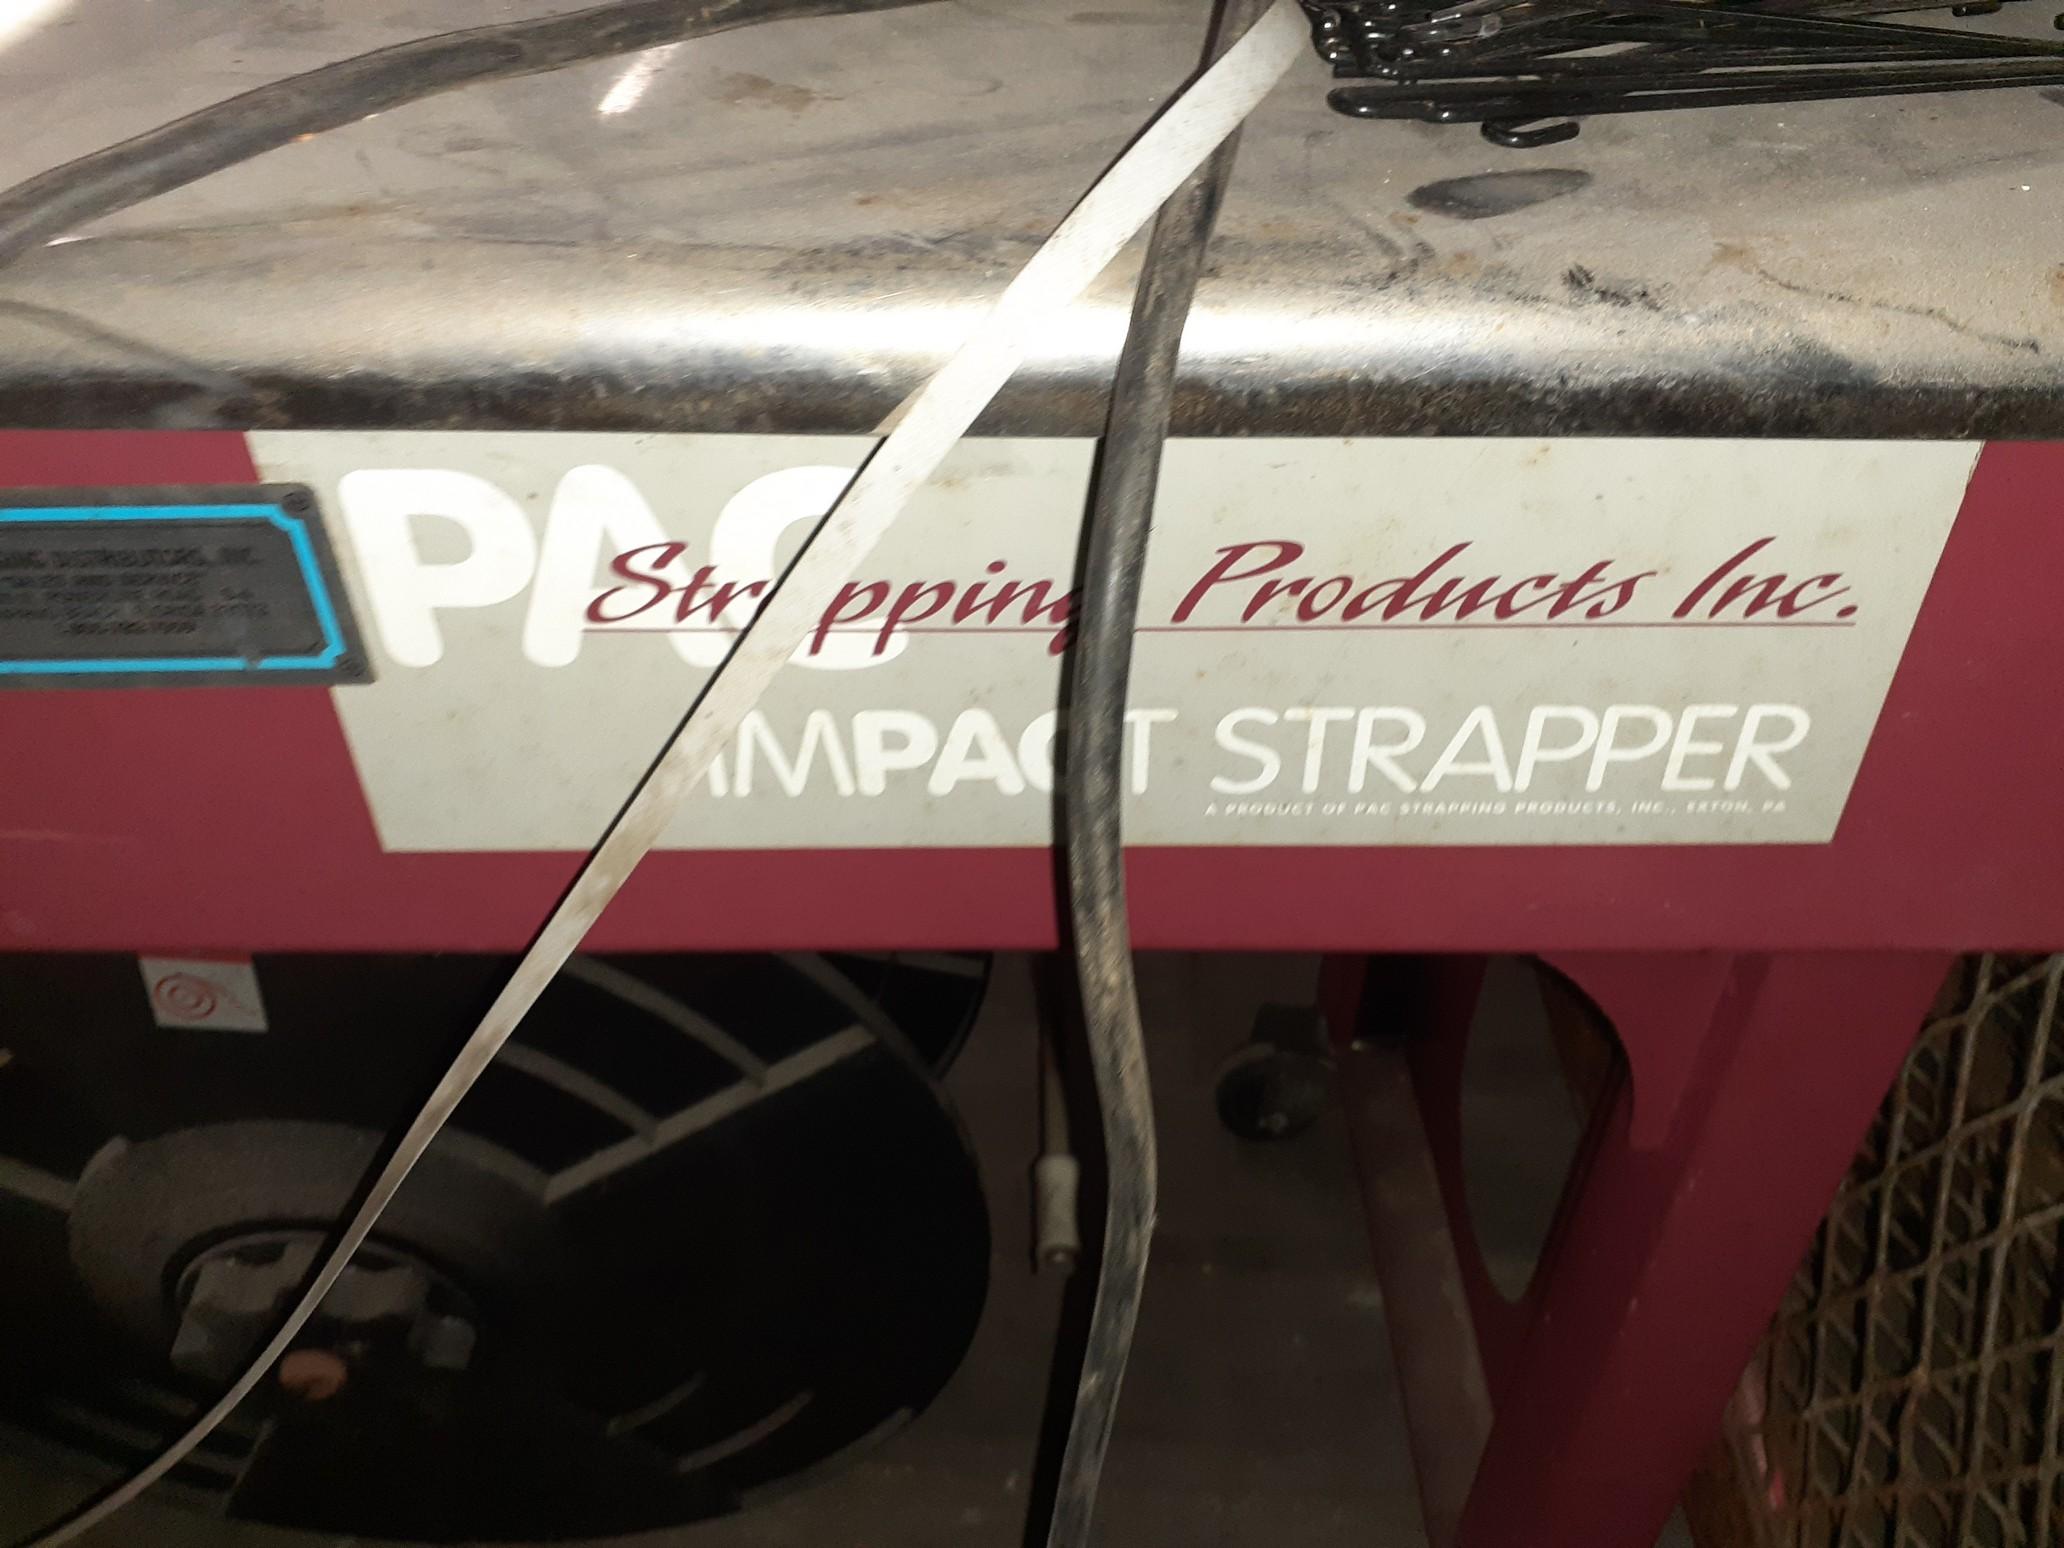 PAC Straping Products - Impact Strapper on casters